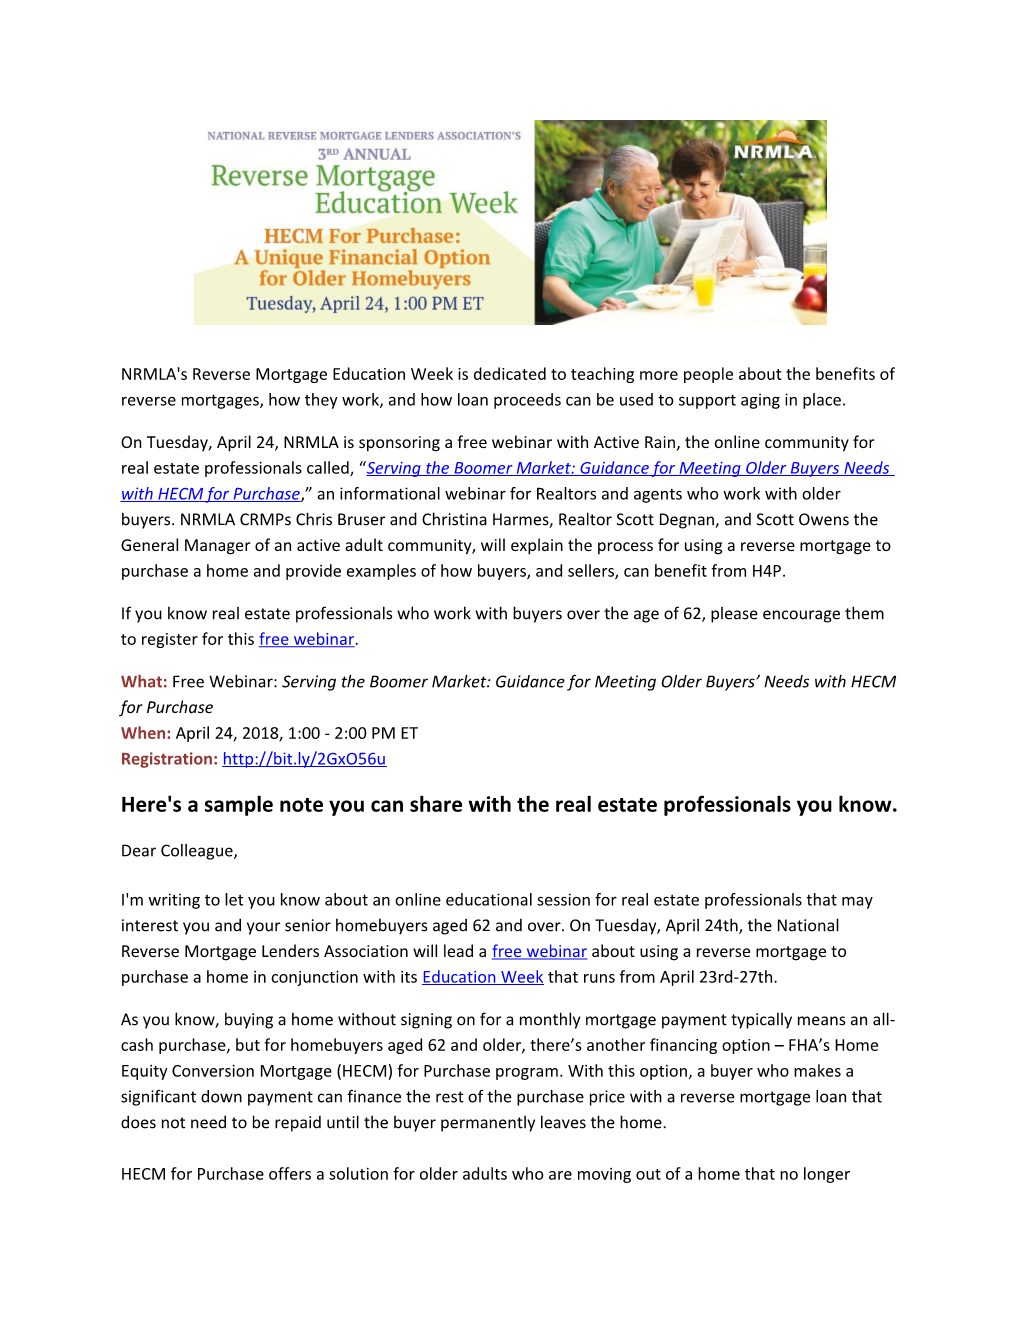 NRMLA's Reverse Mortgage Education Week Is Dedicated to Teaching More People About The